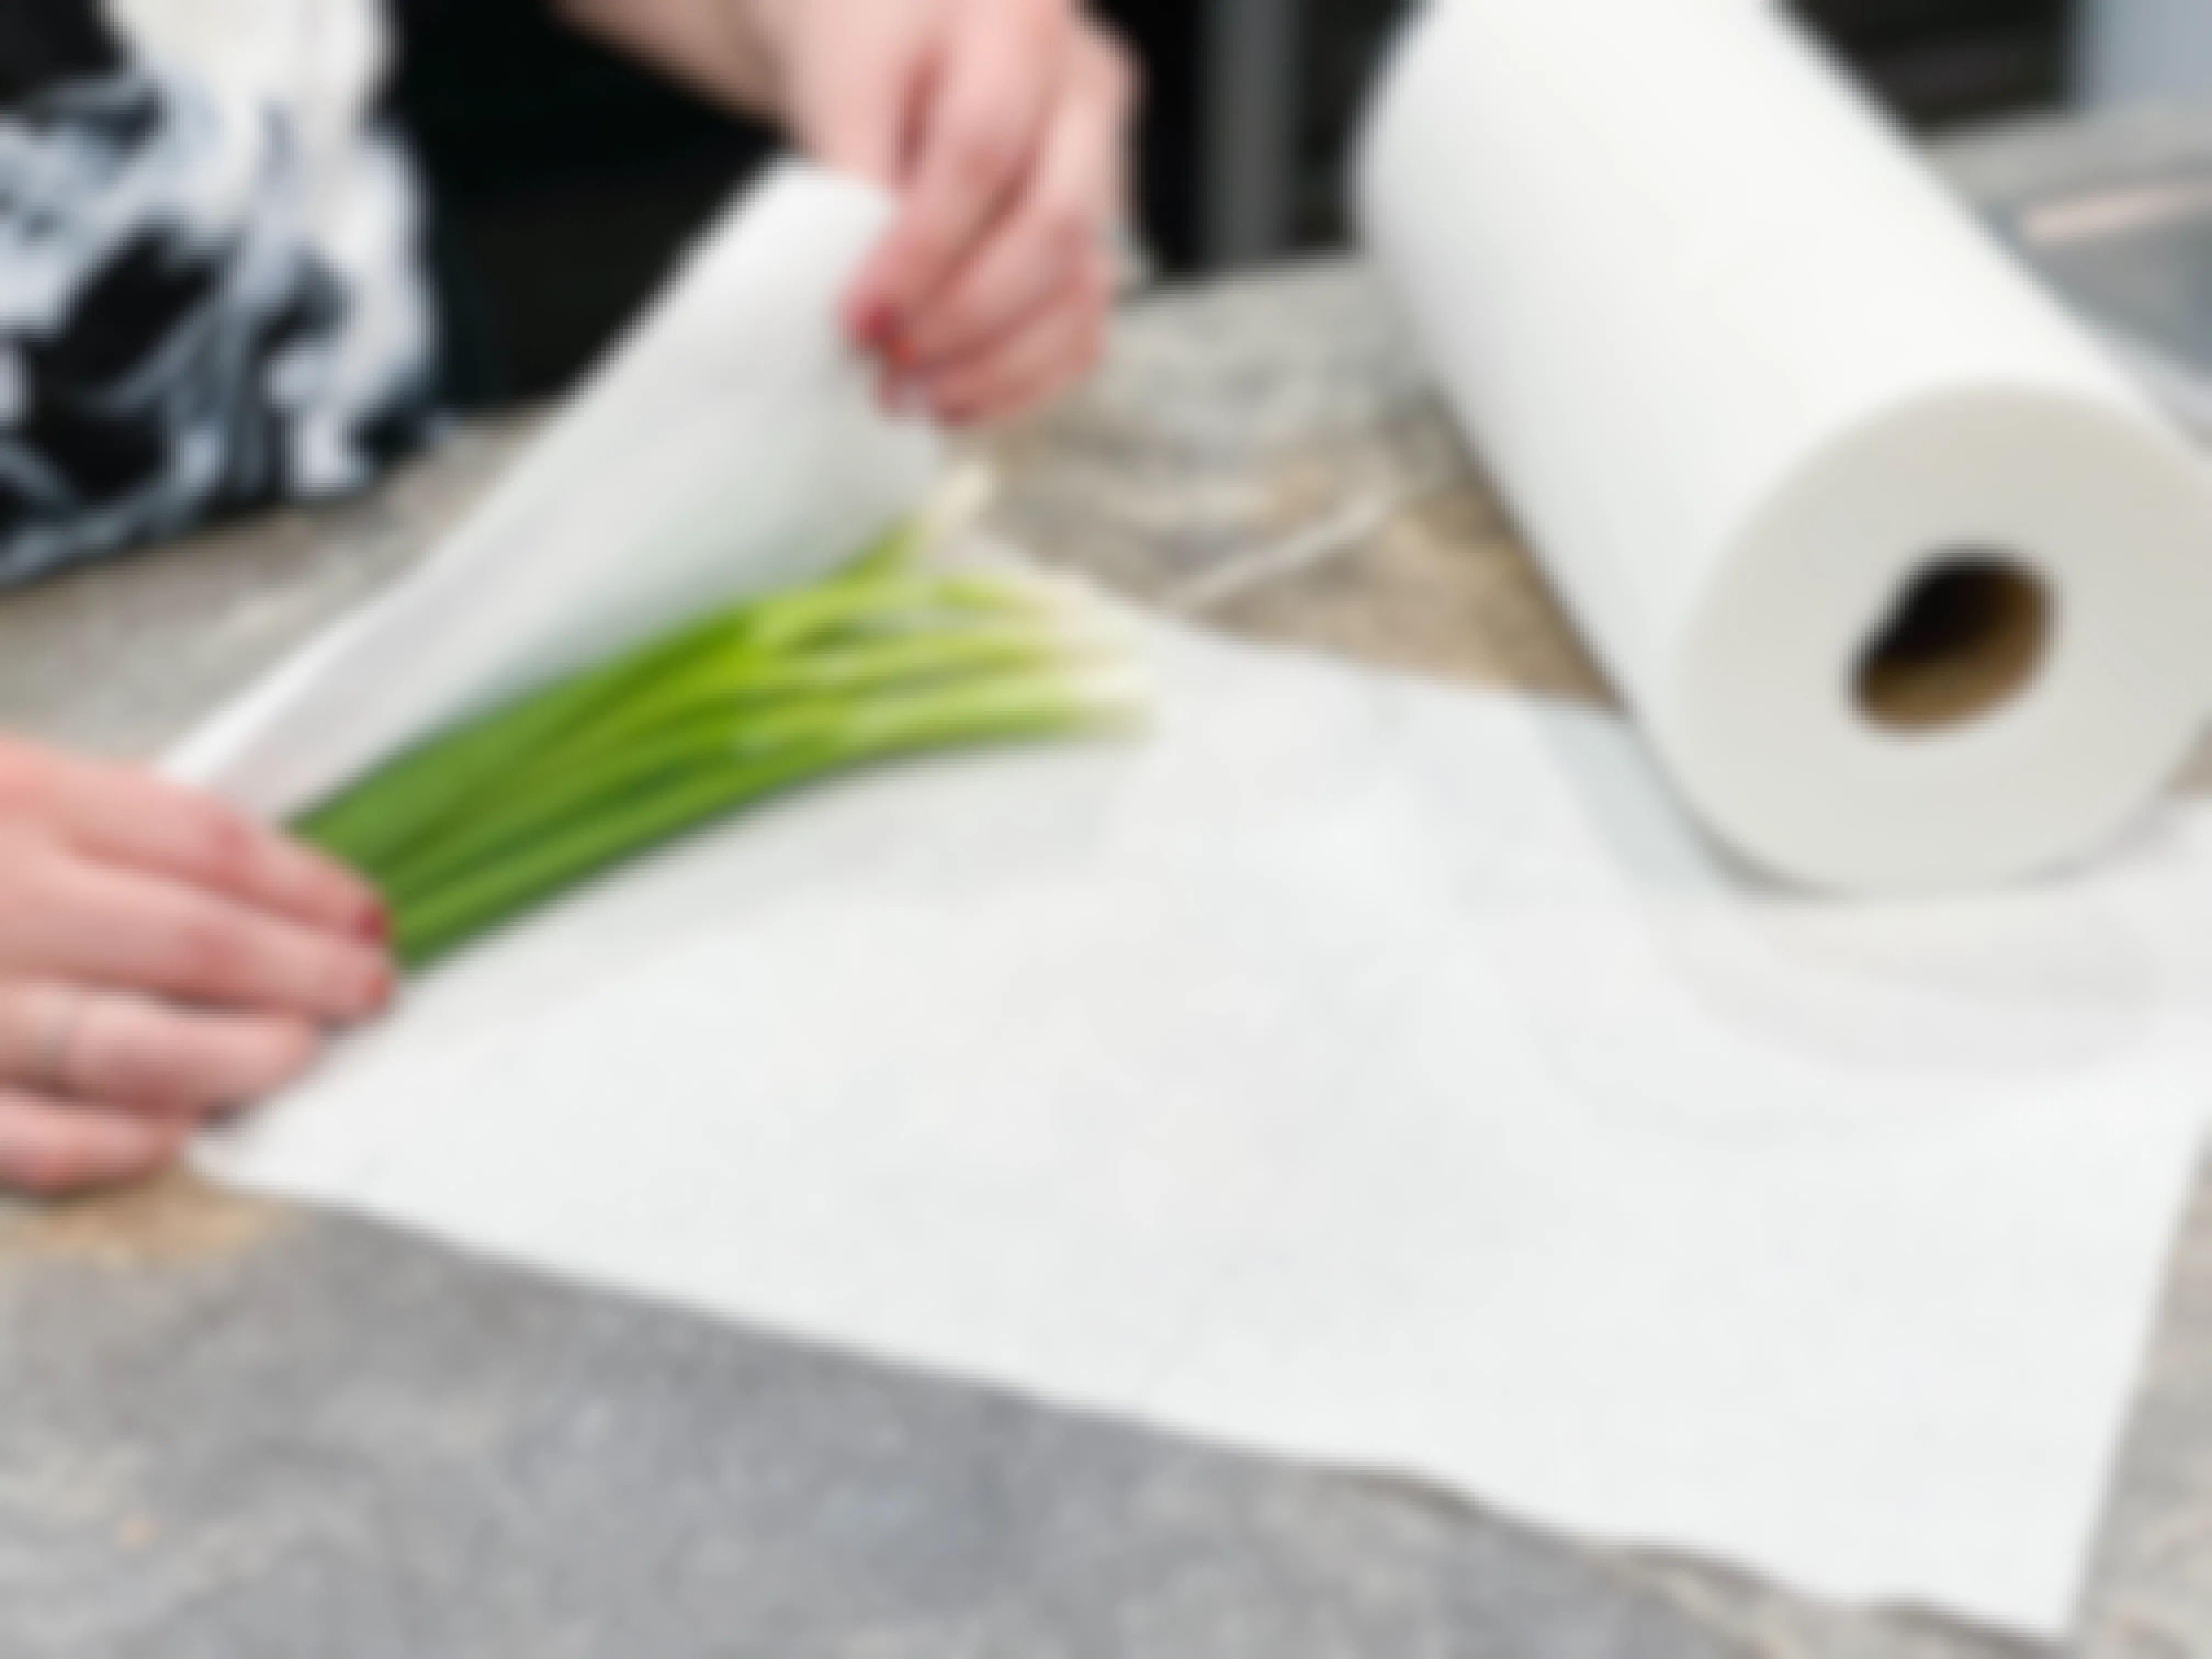 green onions being wrapped in paper towels